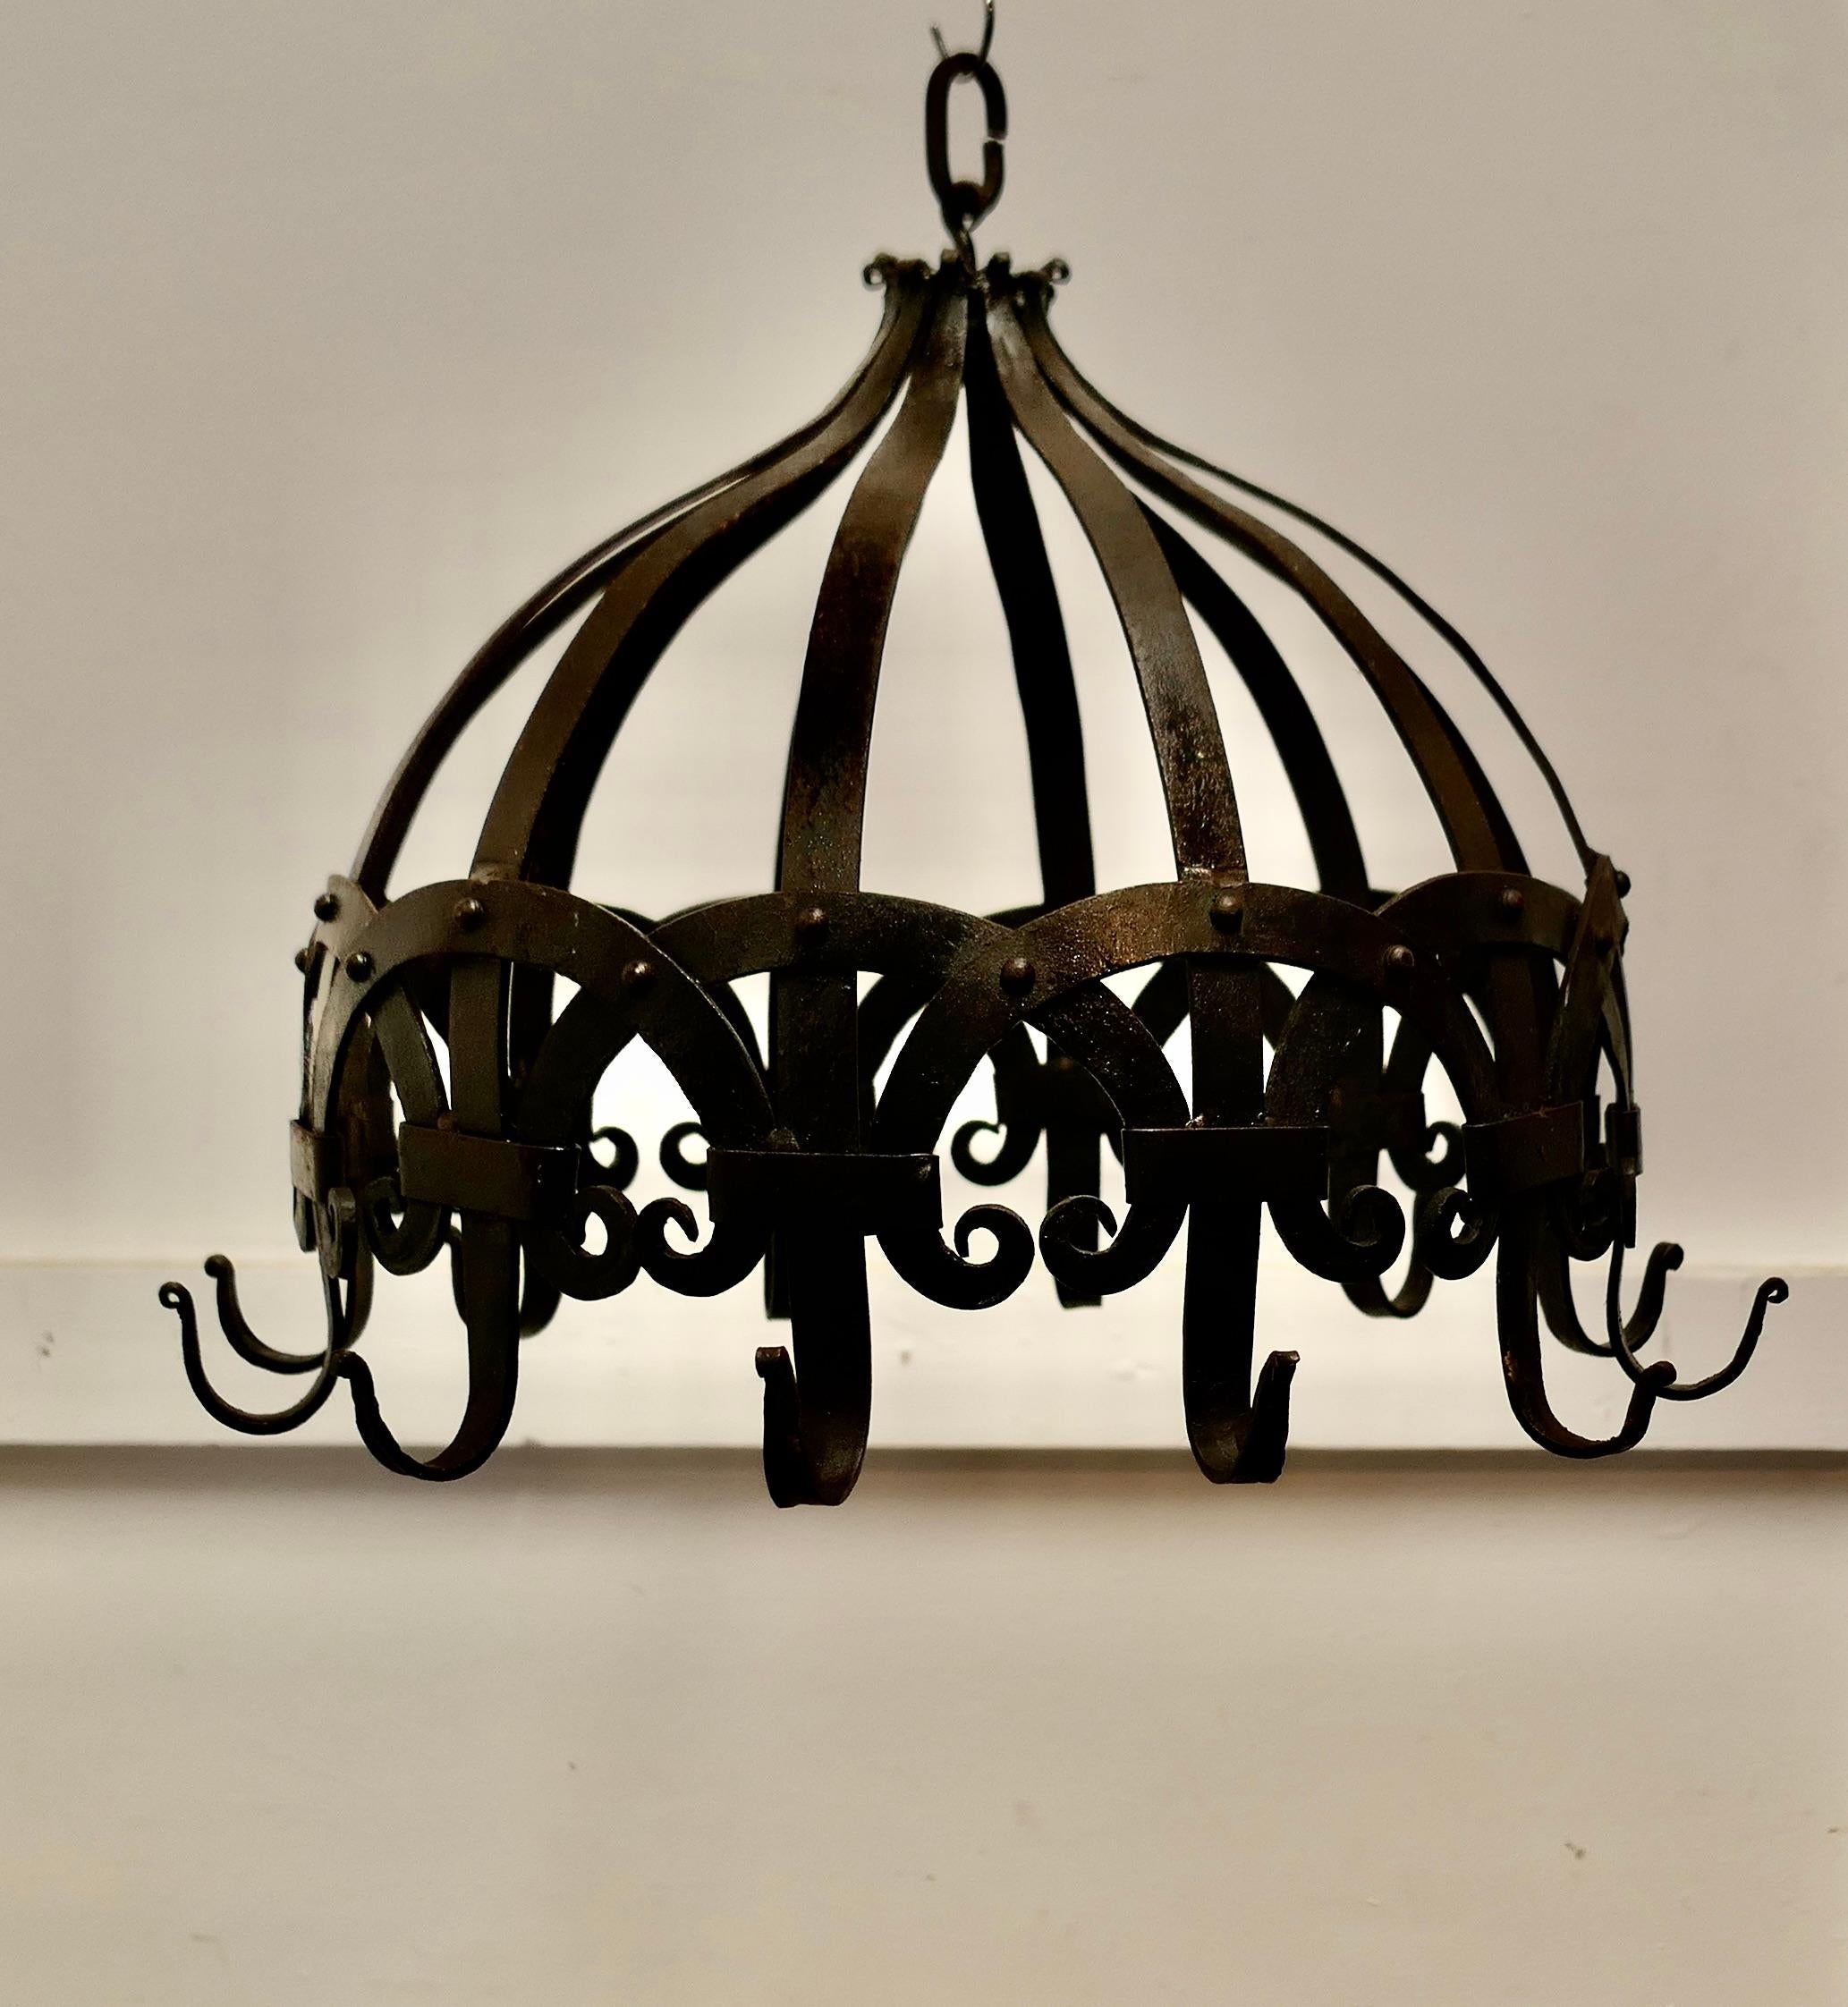 Large Strapwork Blacksmith Made Iron Game Hanger, Kitchen Utensils or Pot Hanger

A great old piece with lots of Character, if you don’t need it to hang your game on how about your pots or kitchen utensils, the hanger is circular with 12 hooks